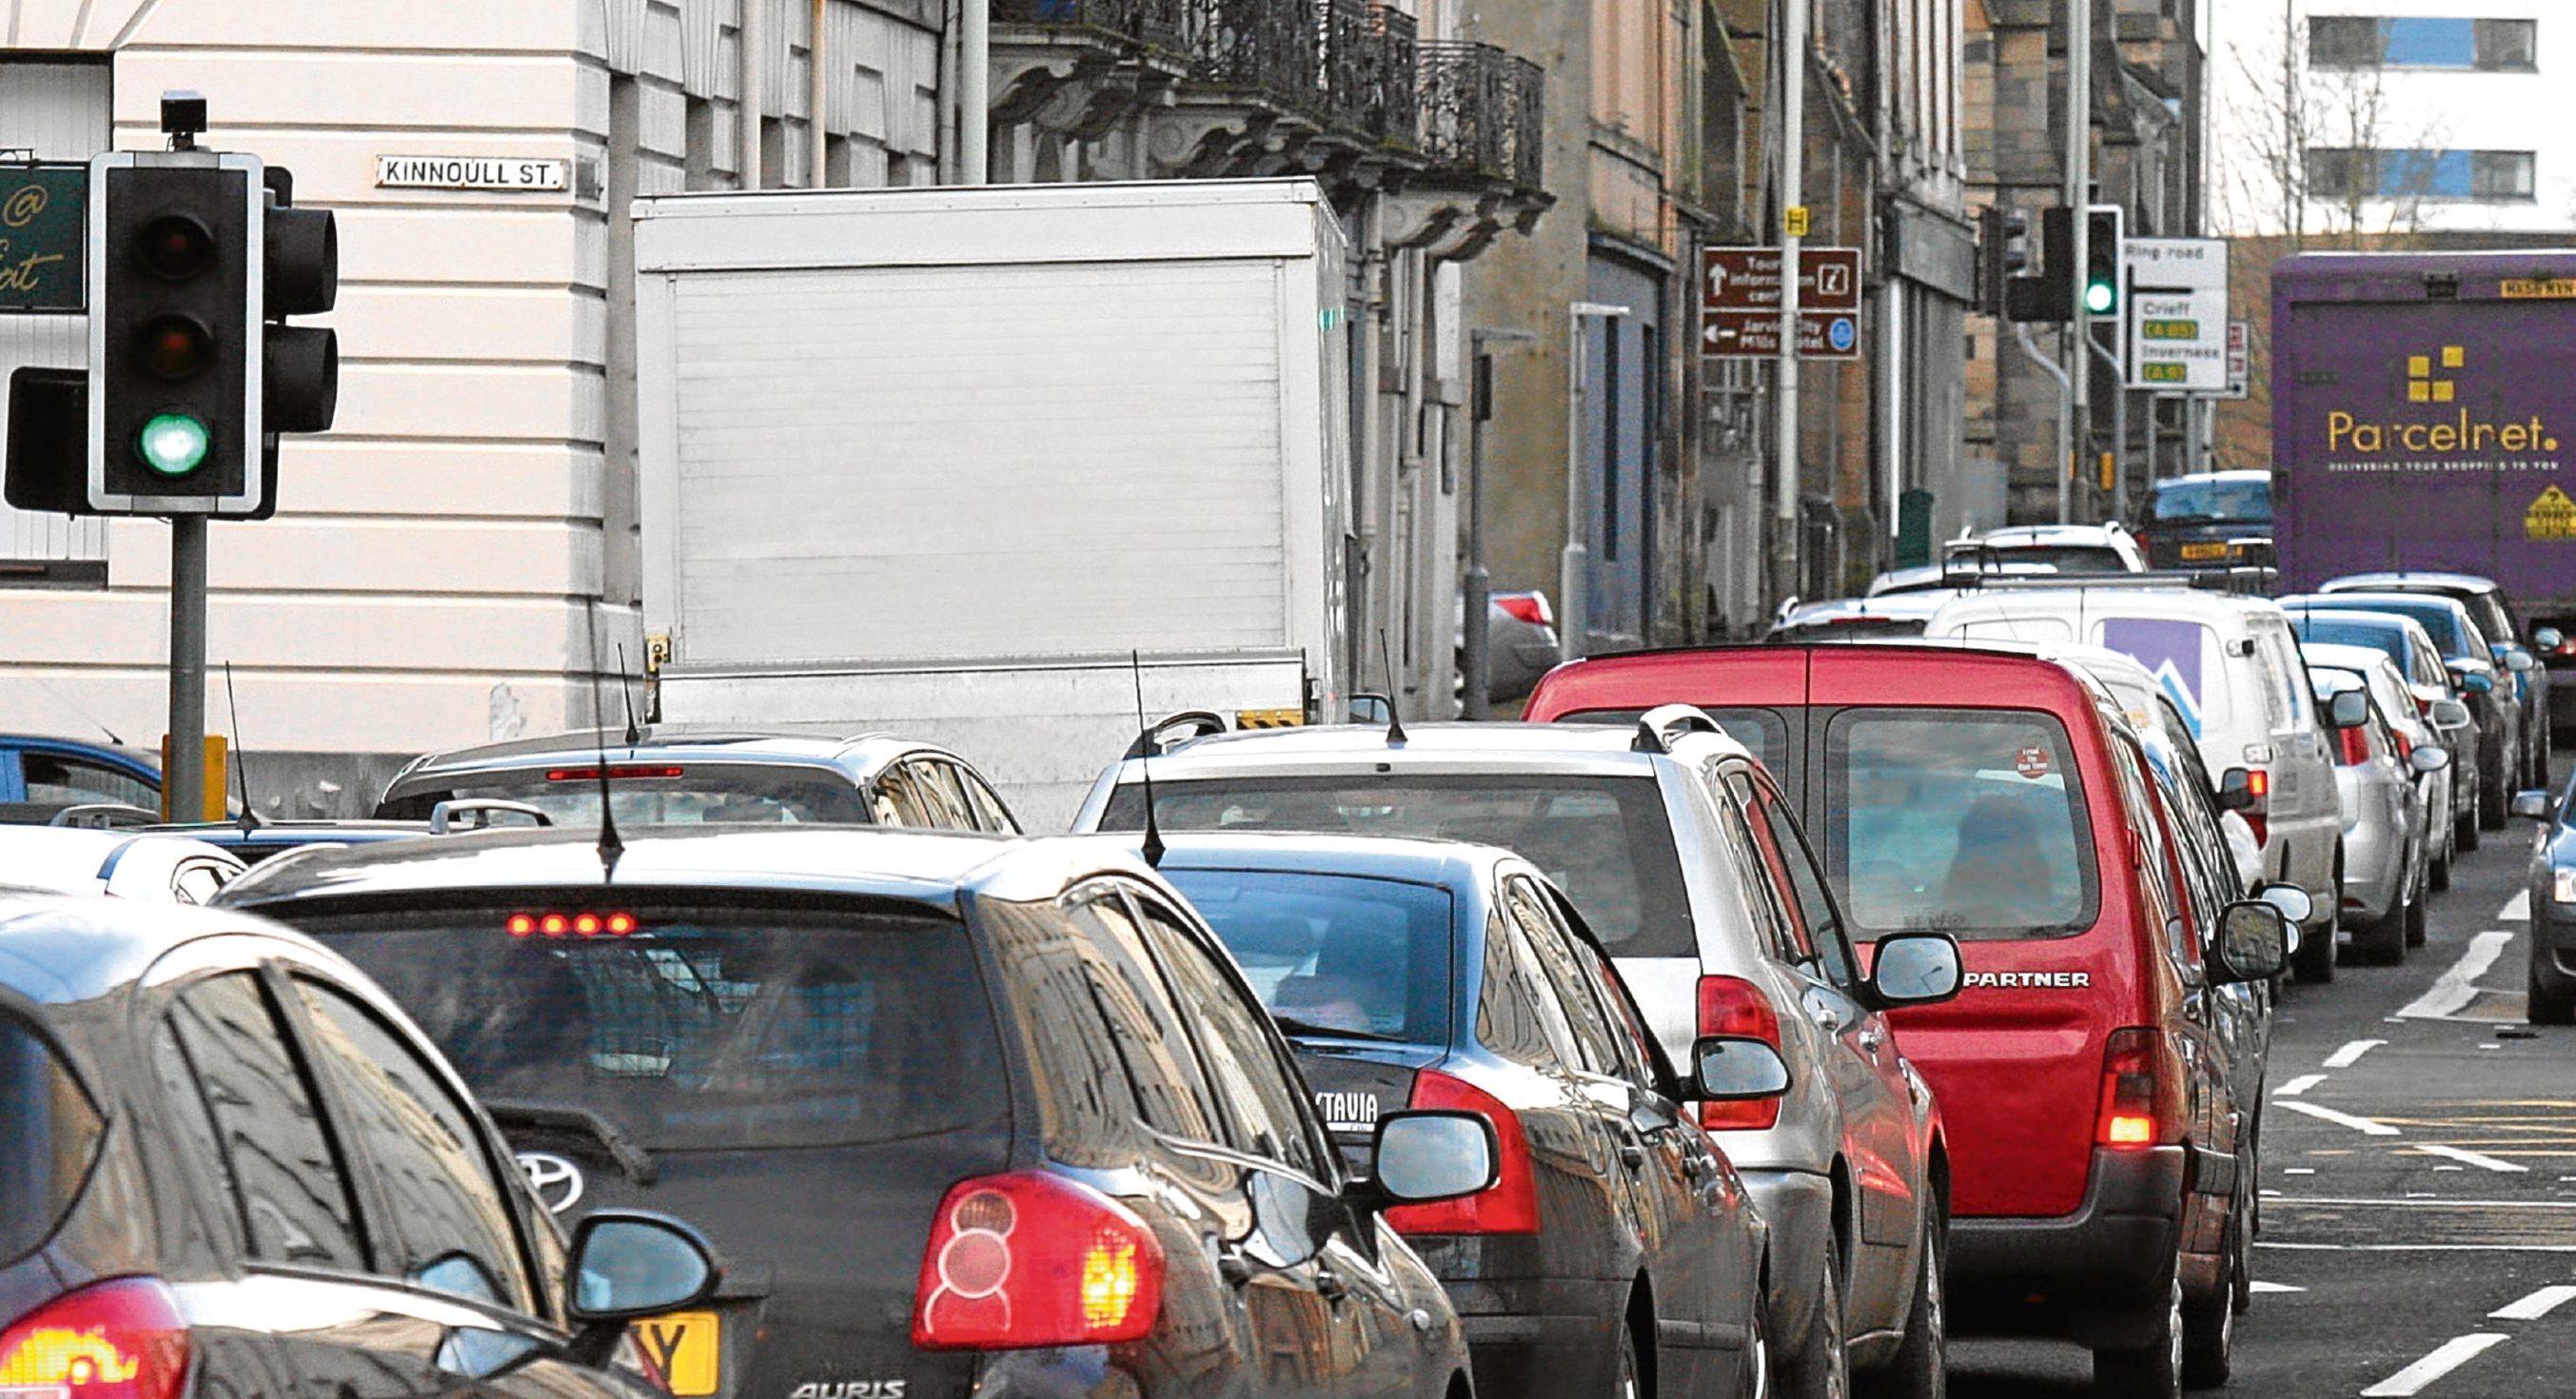 Low emission zones will be up and running in four cities by 2020, according to the Scottish Government